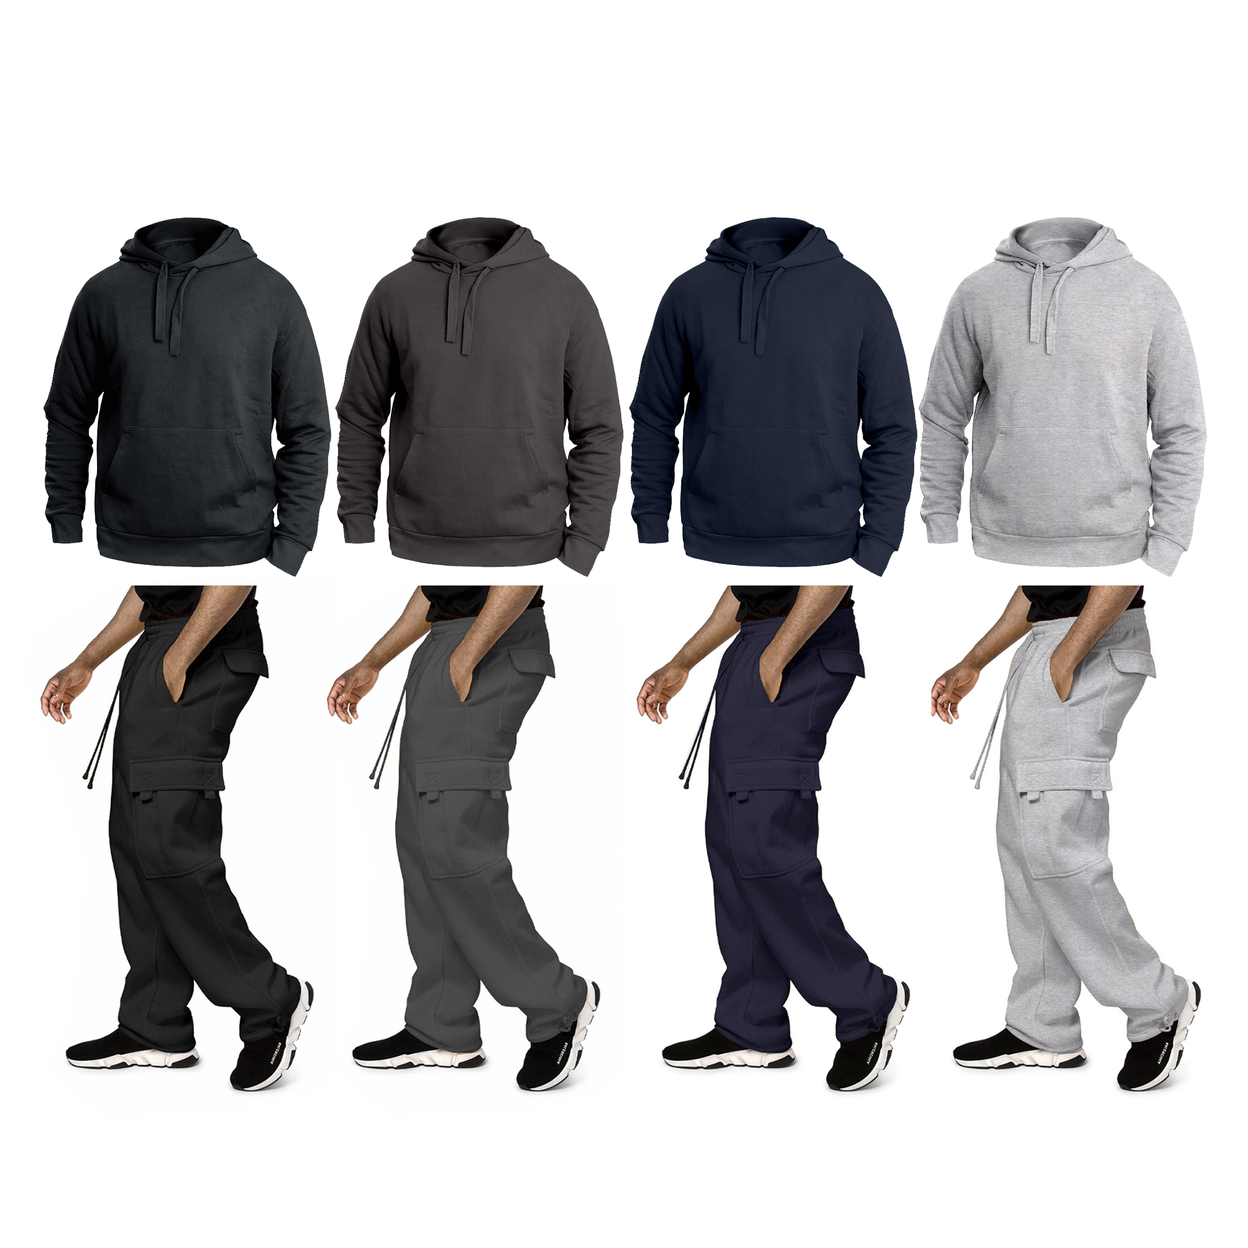 Multi-Pack: Big & Tall Men's Winter Warm Cozy Athletic Fleece Lined Multi-Pocket Cargo Sweatsuit - Navy, 2-pack, Small